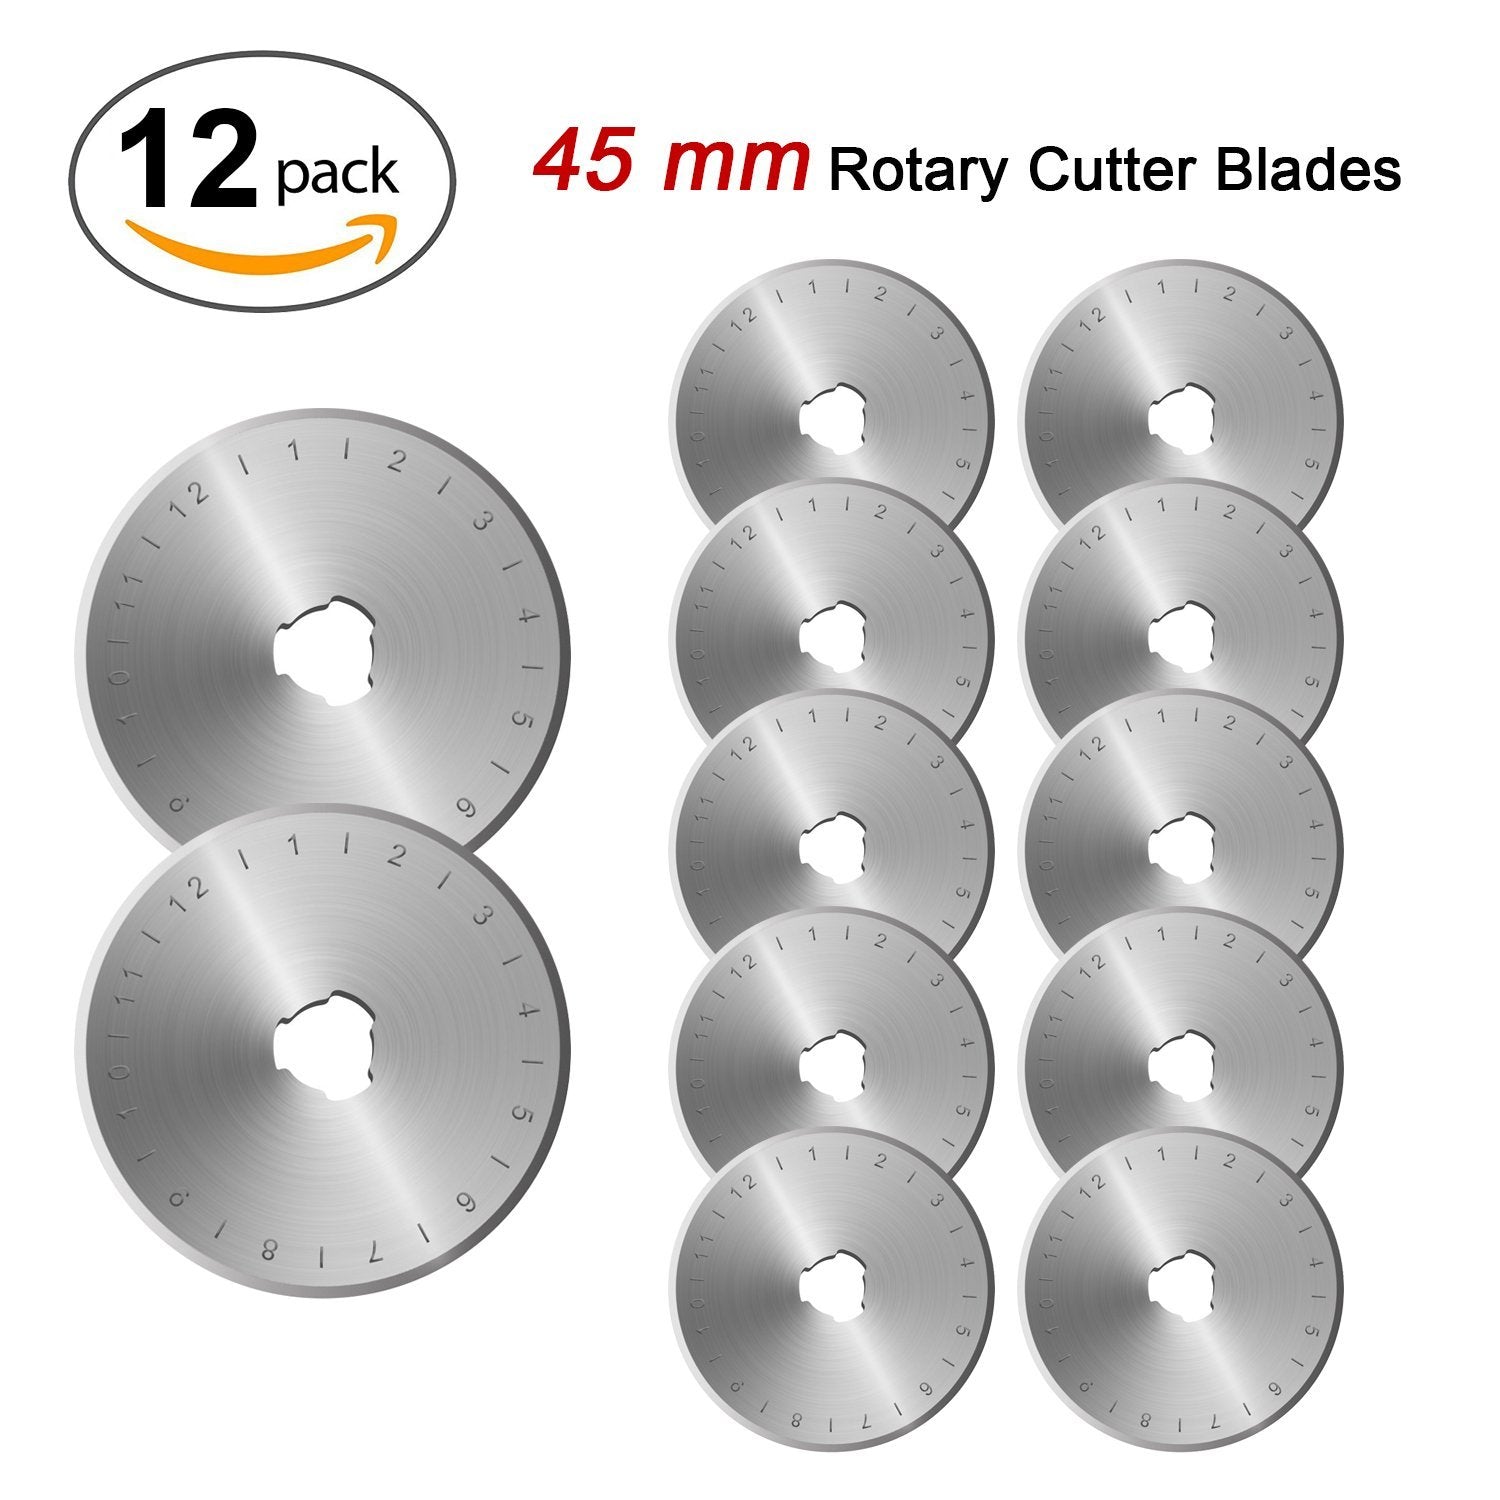 Rotary Cutter Blades Replacement with Scale, Rotary Blades Fits Fiskars,  Olfa, Martelli, Dremel